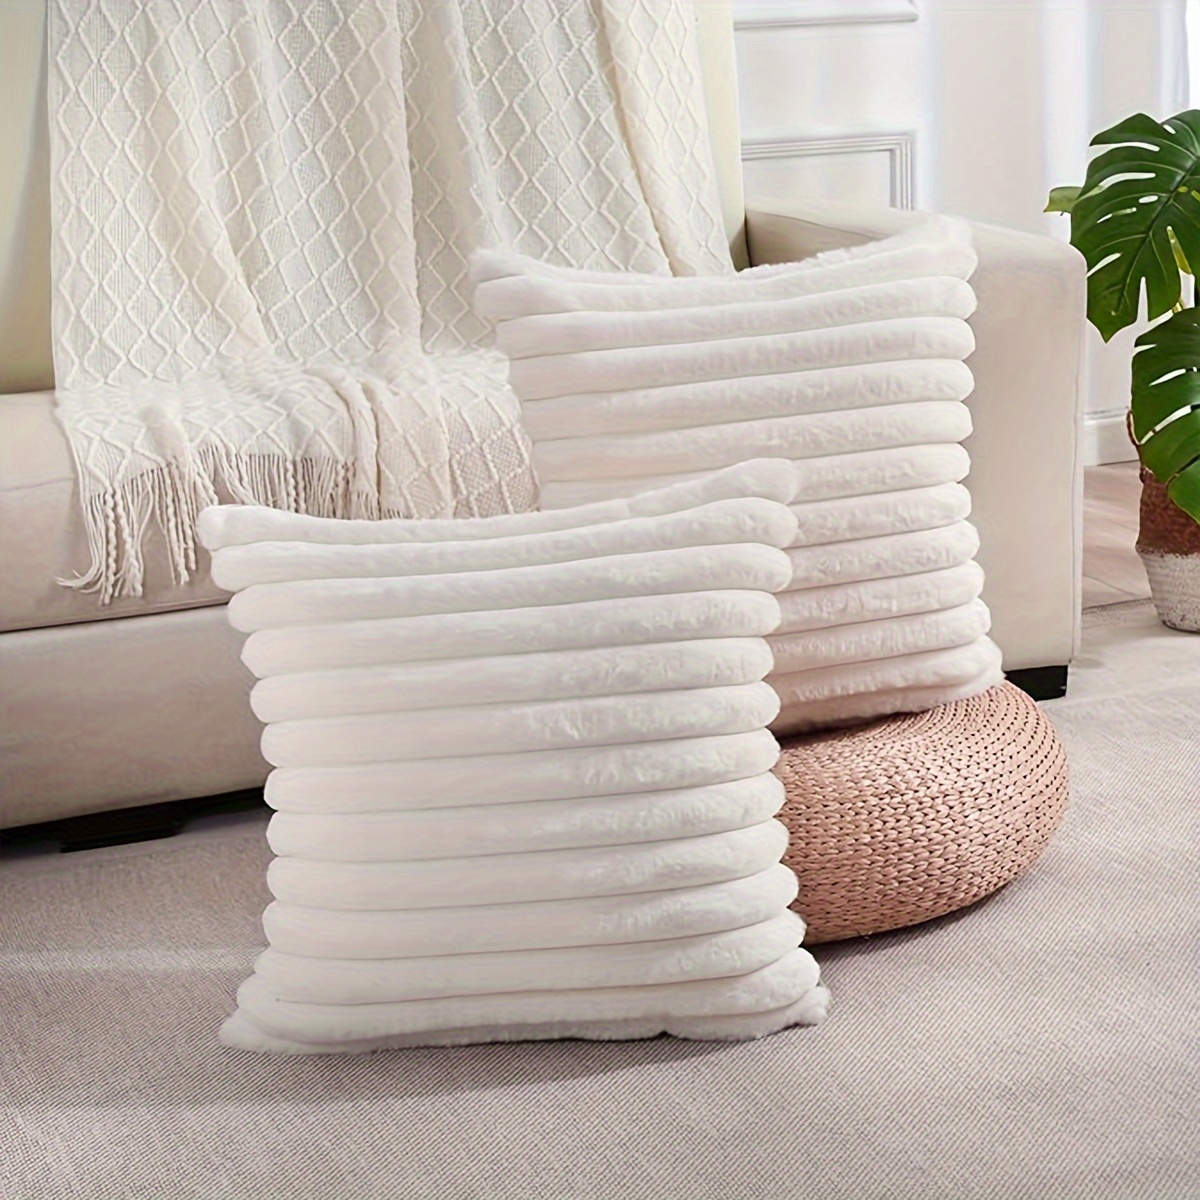 

1 Set Of 2 Pieces Of Creamy White Plush Vertical Striped Pillowcases, No Pillow Insert, For Home Sofa Bed Car Decorative Pillowcases And Cushion Covers